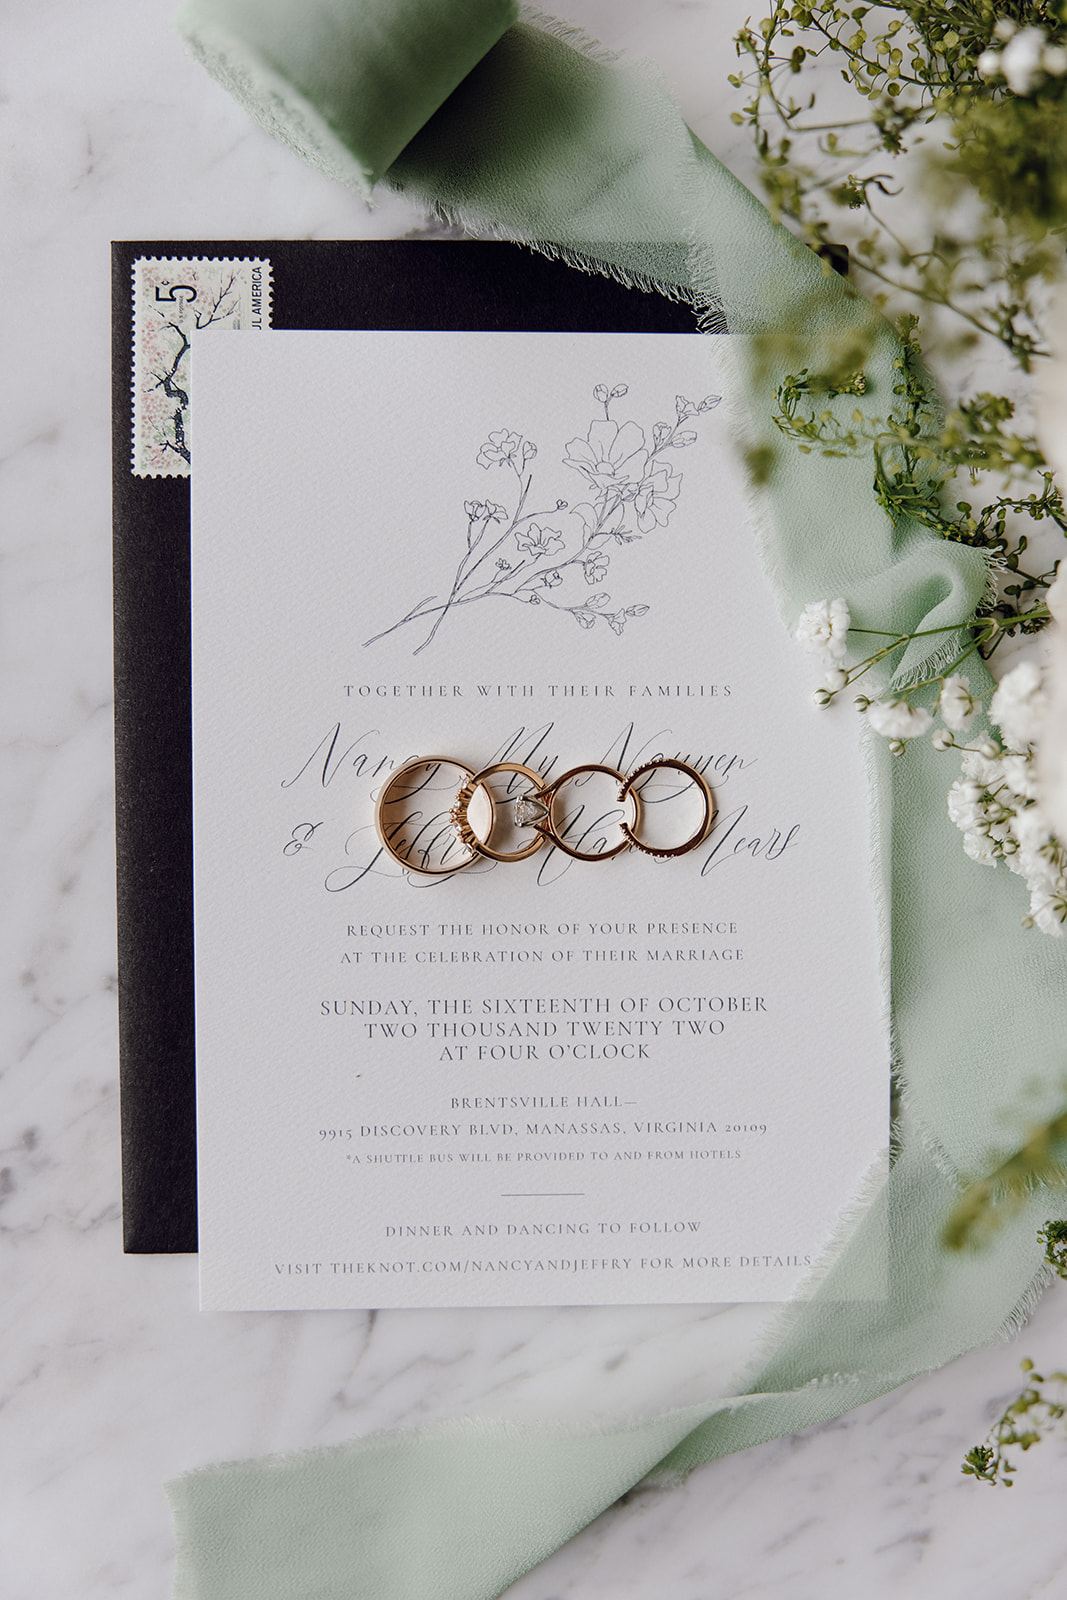 the wedding details with the wedding rings on top of the wedding invitations